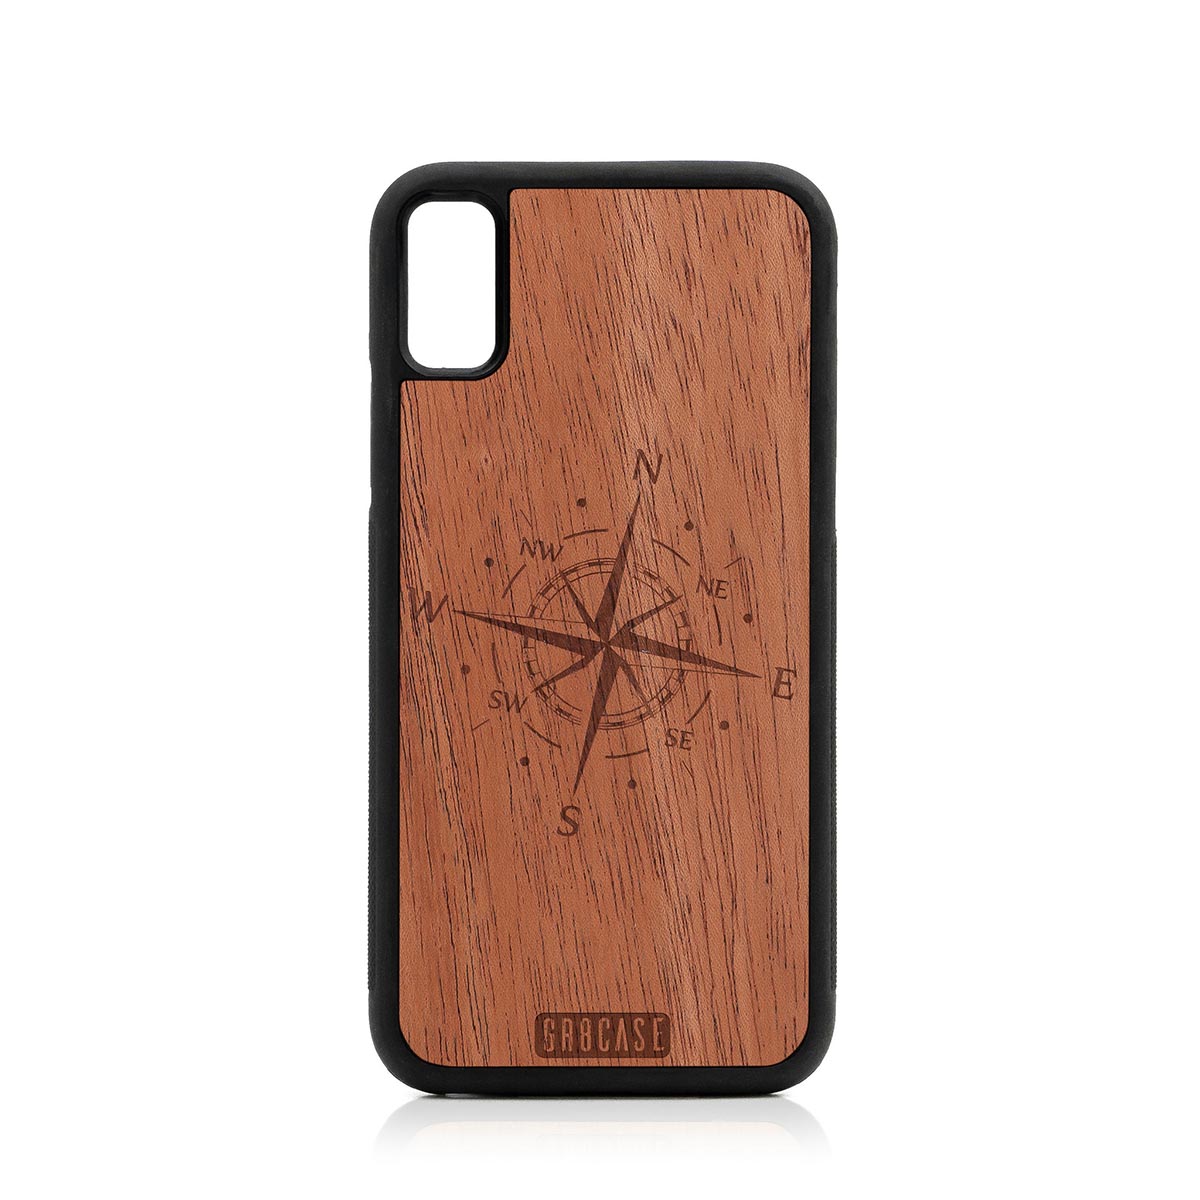 Compass Design Wood Case For iPhone XR by GR8CASE